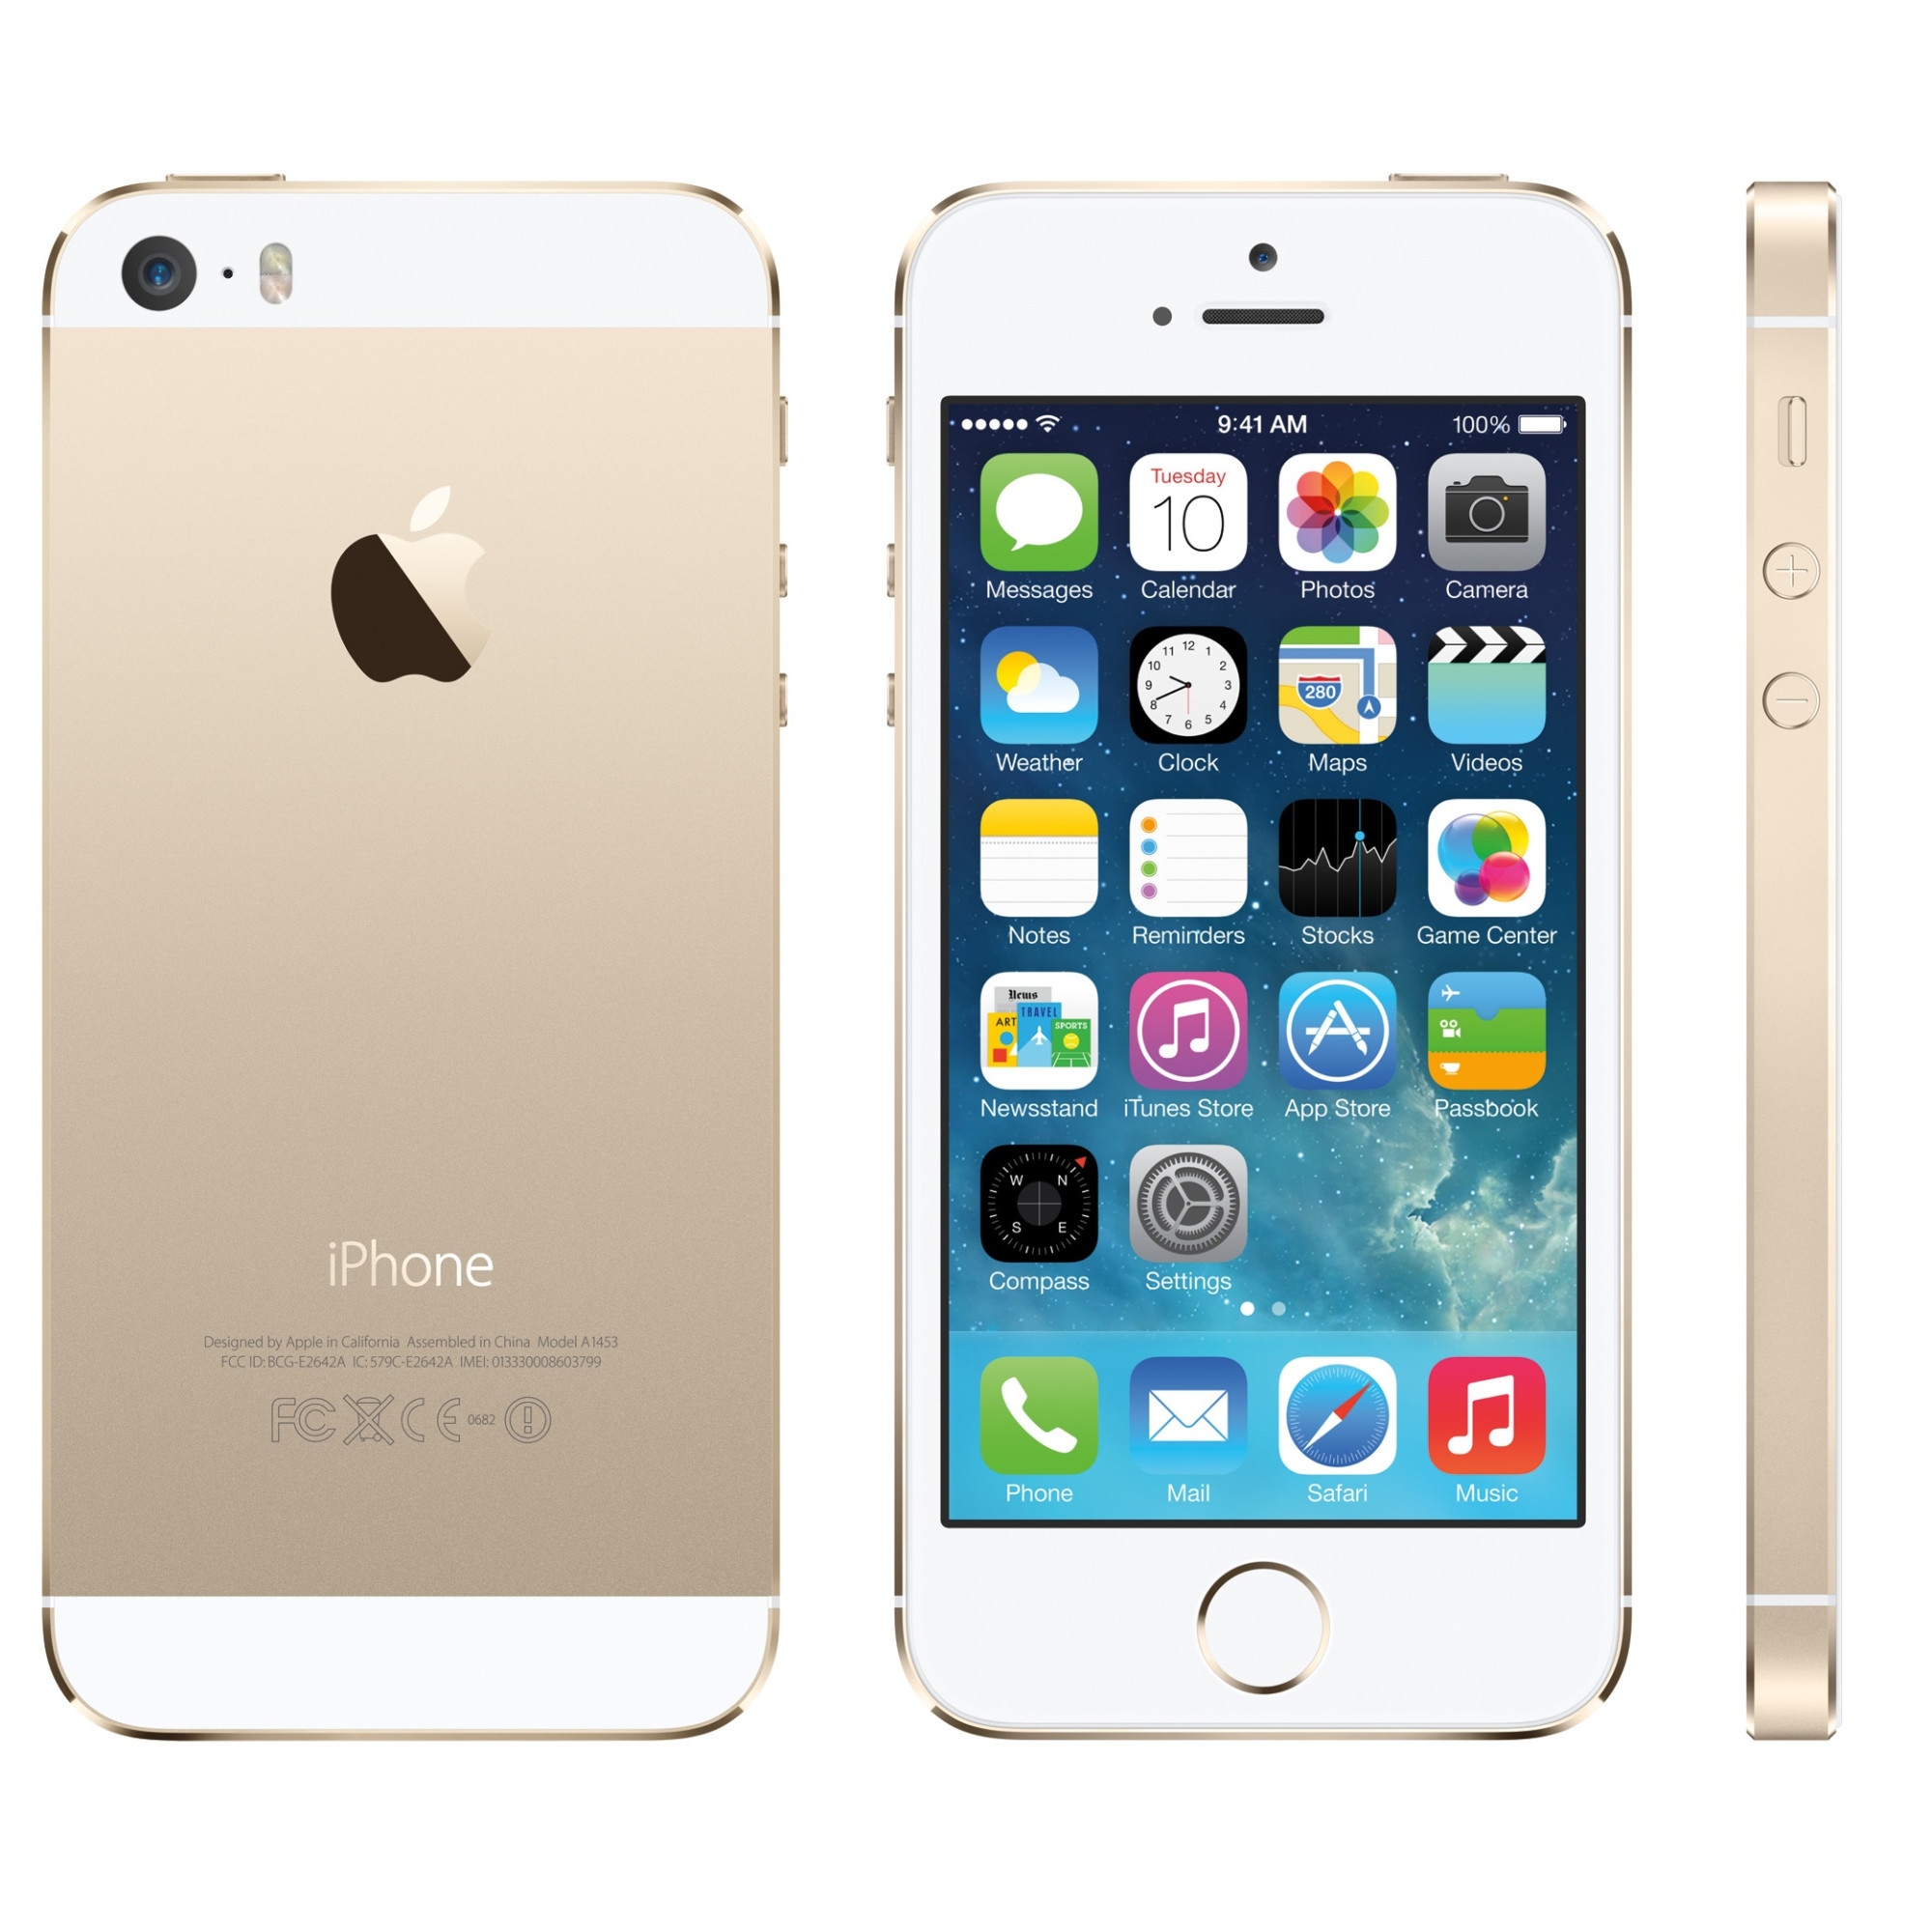 Restored Apple iPhone 5S 16GB, Gold - Locked AT&T (Refurbished) - image 2 of 3